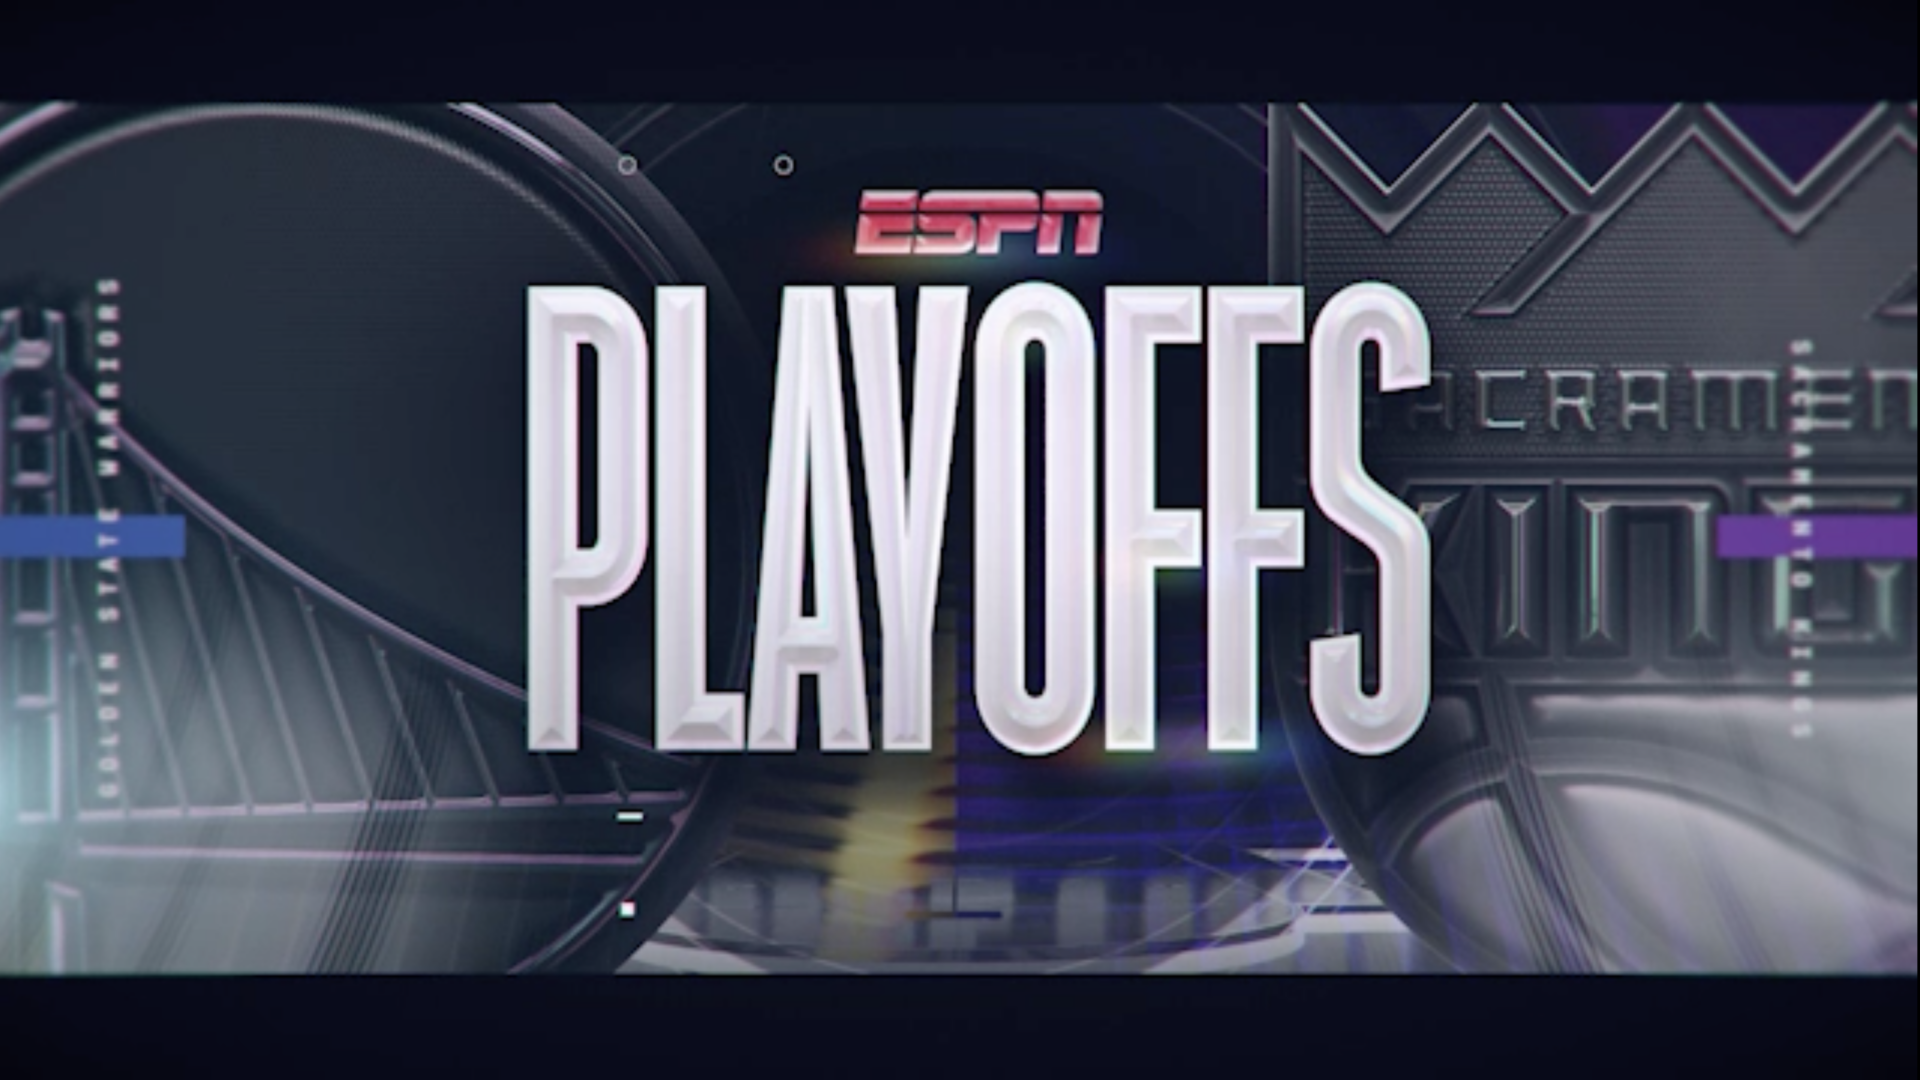 ESPN Sets NBA Playoffs 1st Round Audience Record for Golden State Warriors-Sacramento Kings Game 6